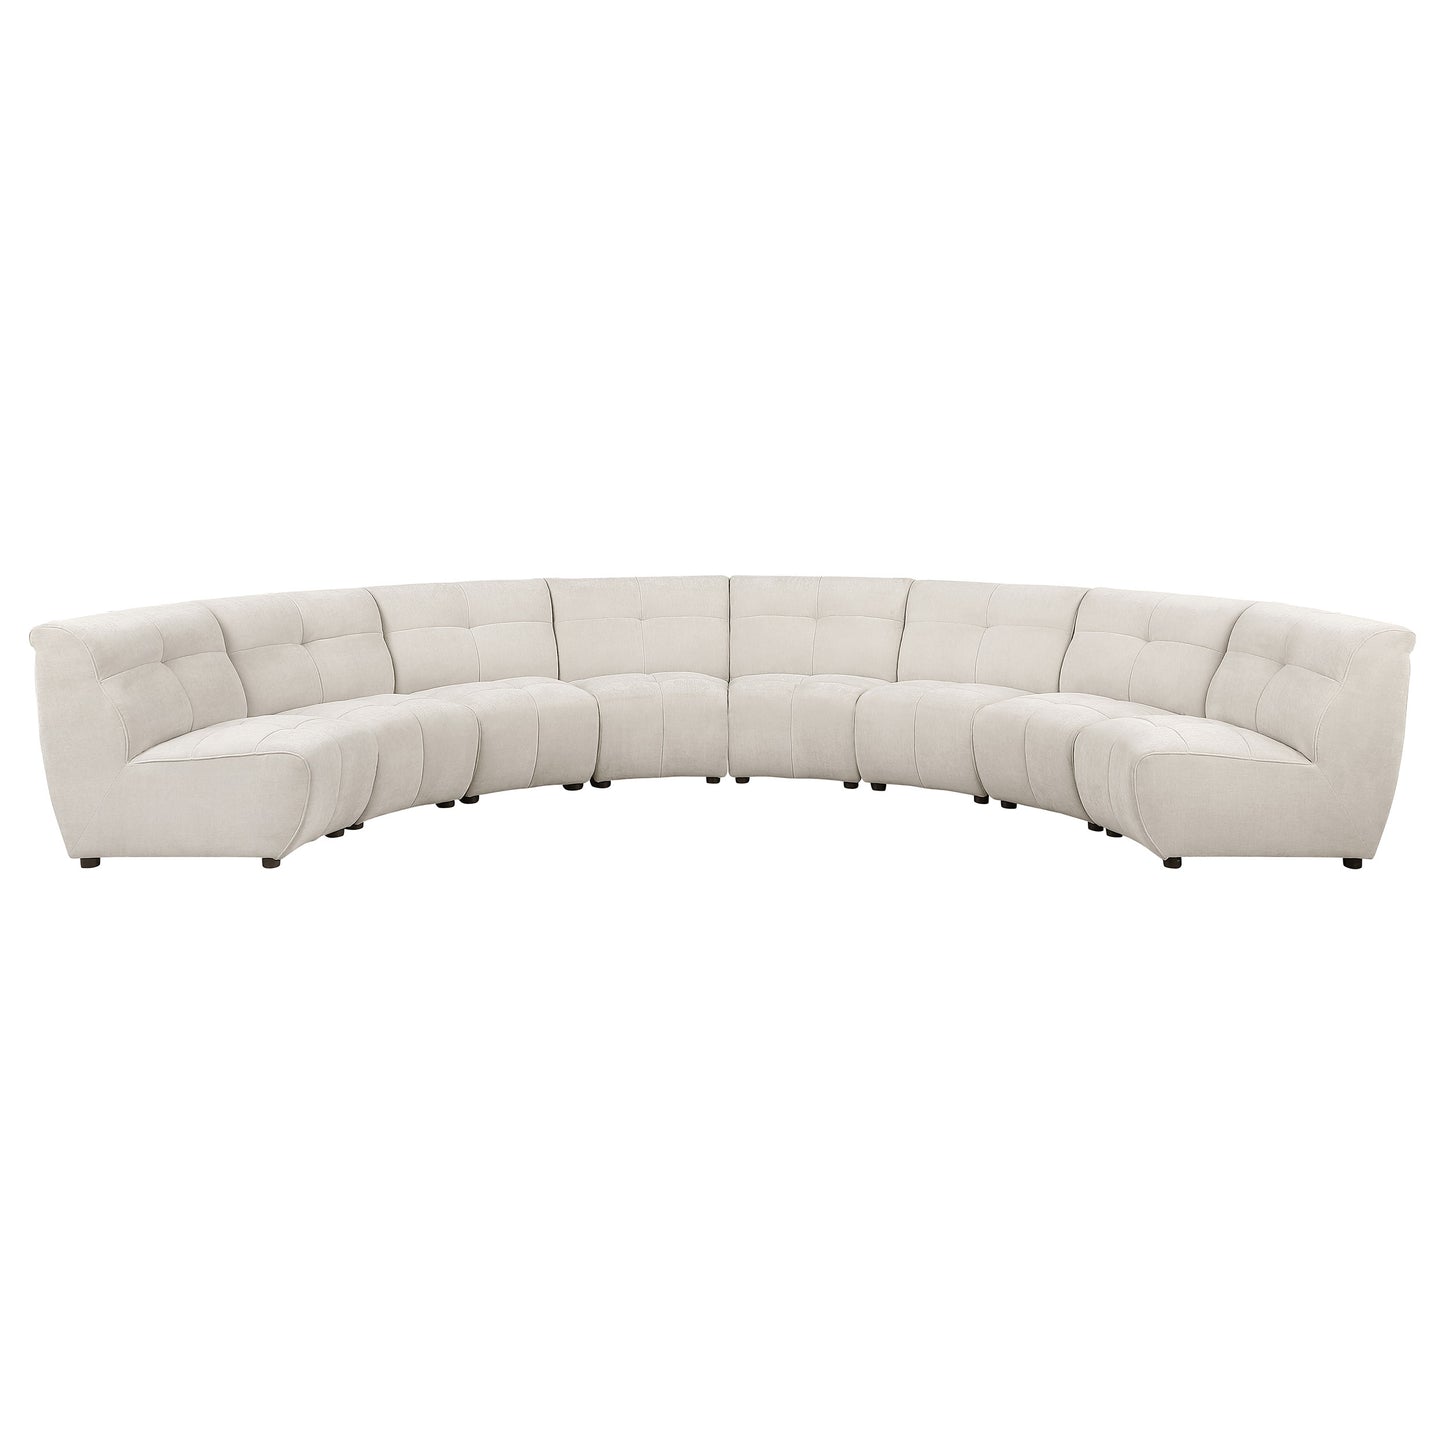 Charlotte 8-piece Upholstered Curved Modular Sectional Sofa Ivory